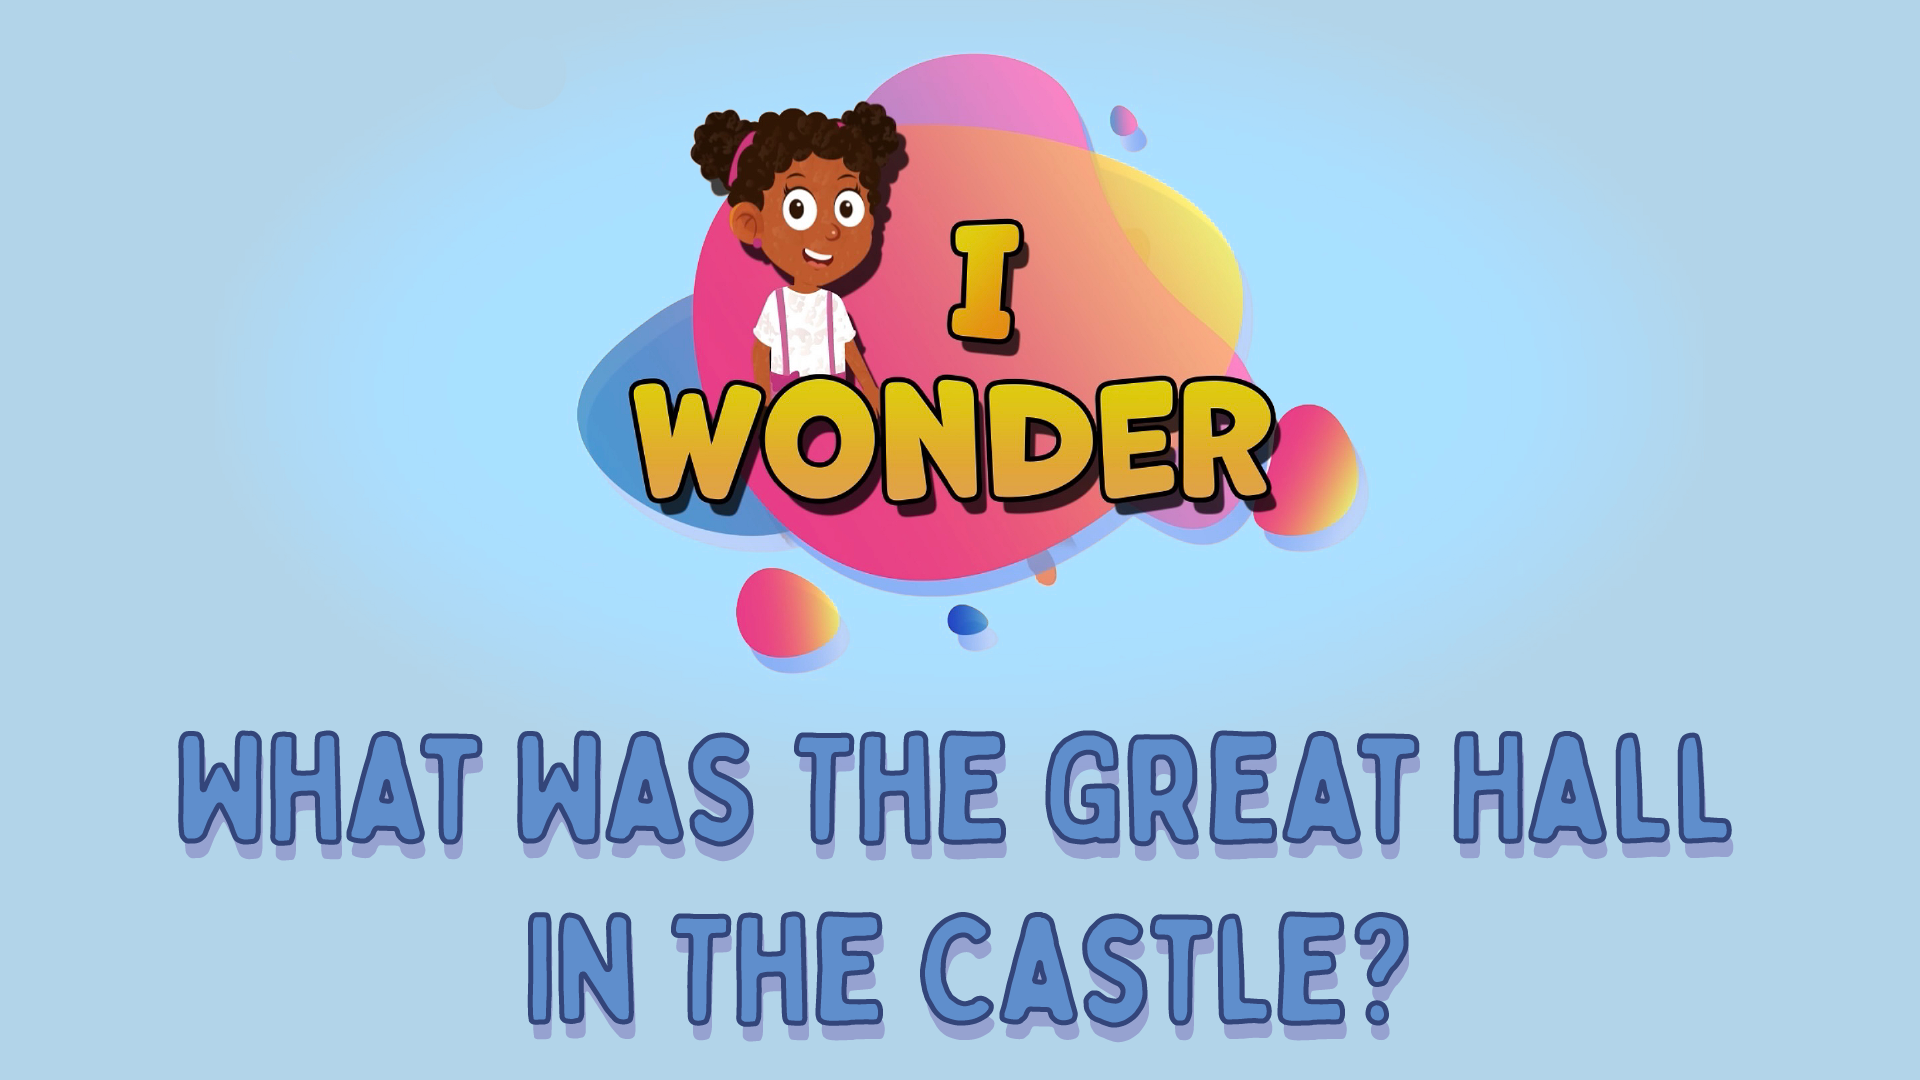 What Was The Great Hall In The Castle?